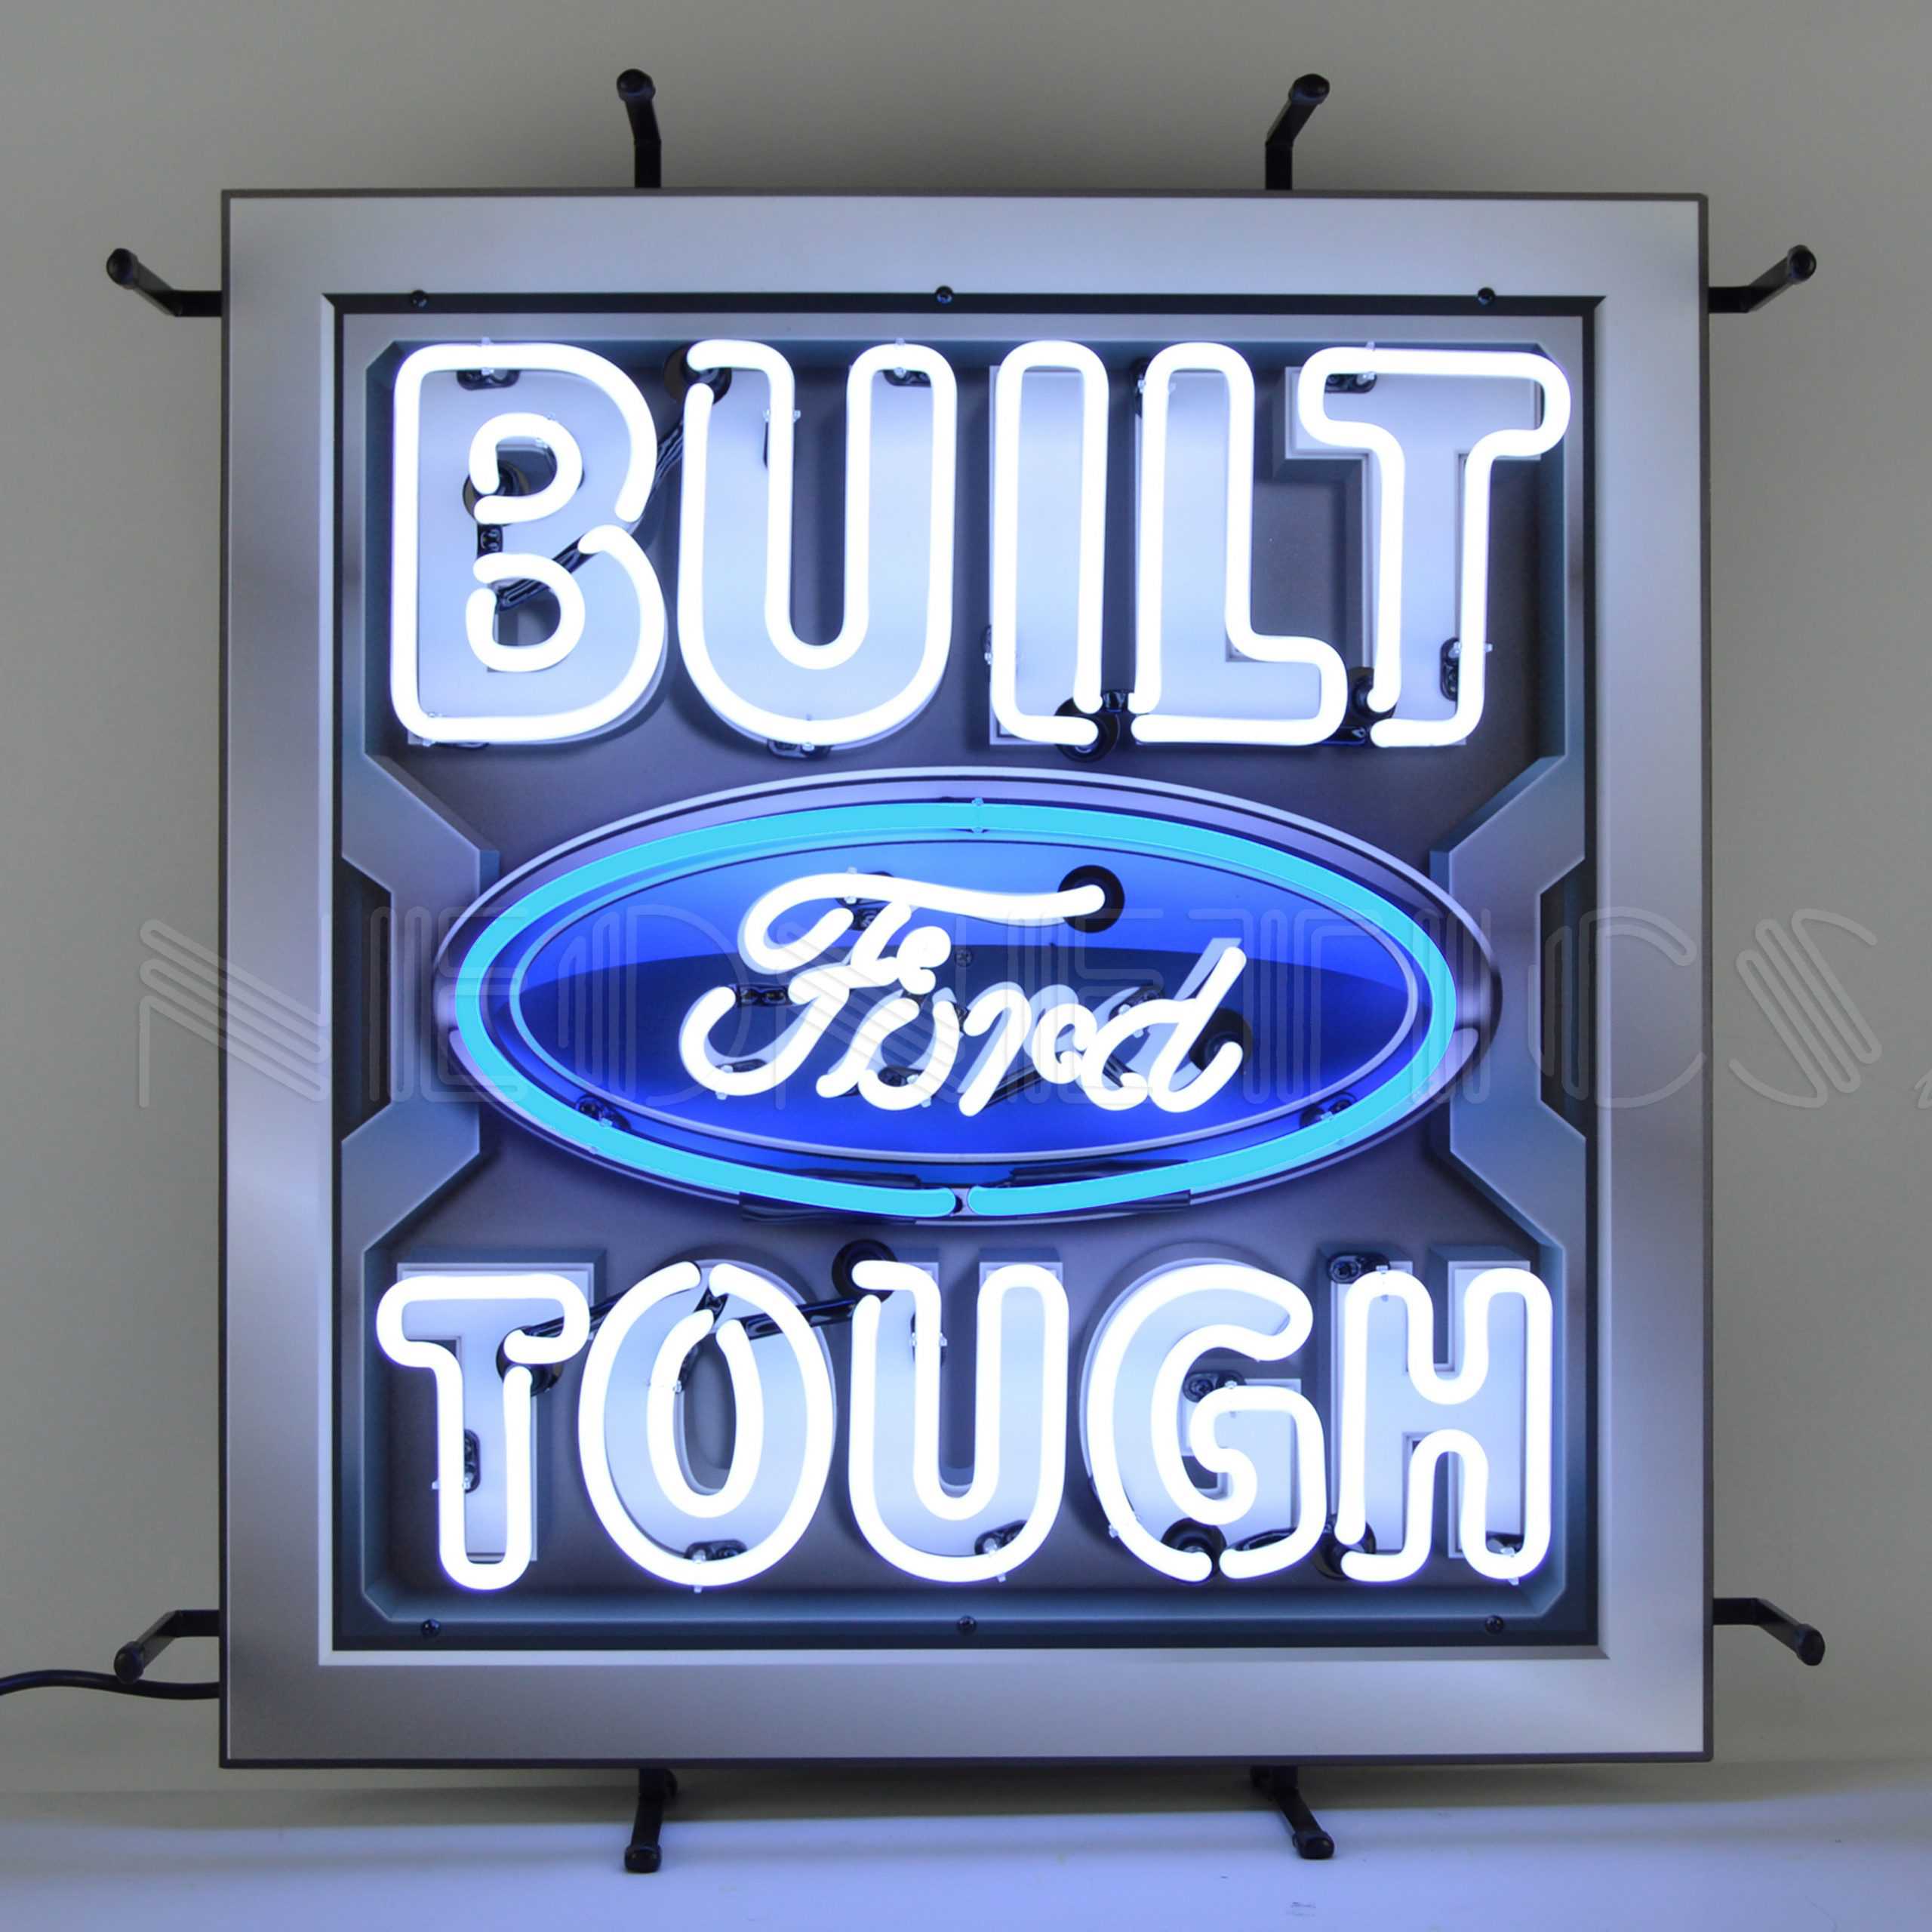 FORD - BUILT FORD TOUGH NEON SIGN WITH BACKING